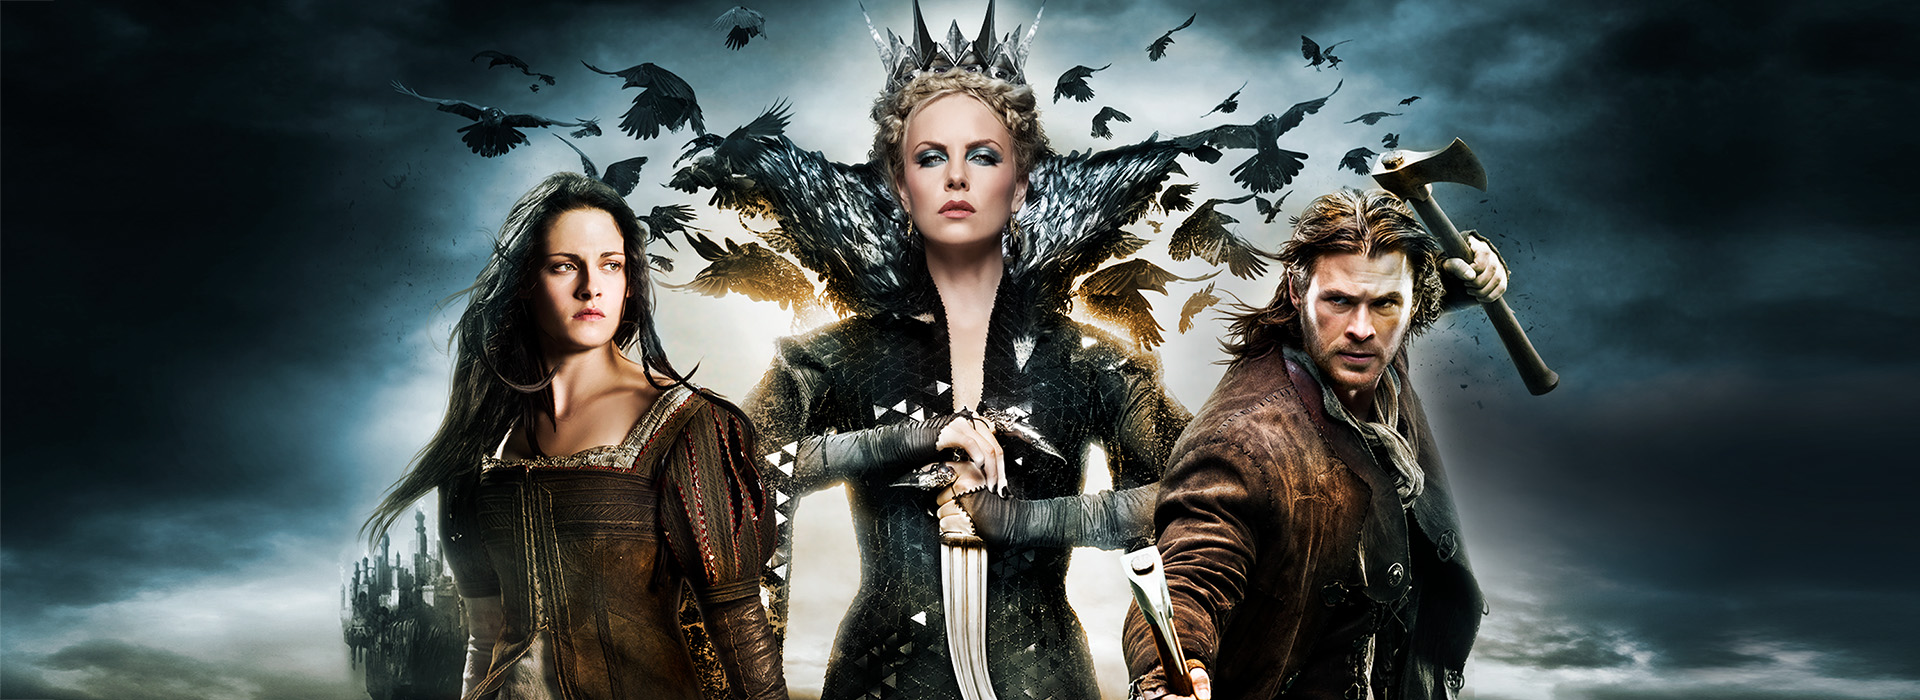 Movie poster Snow White and the Huntsman